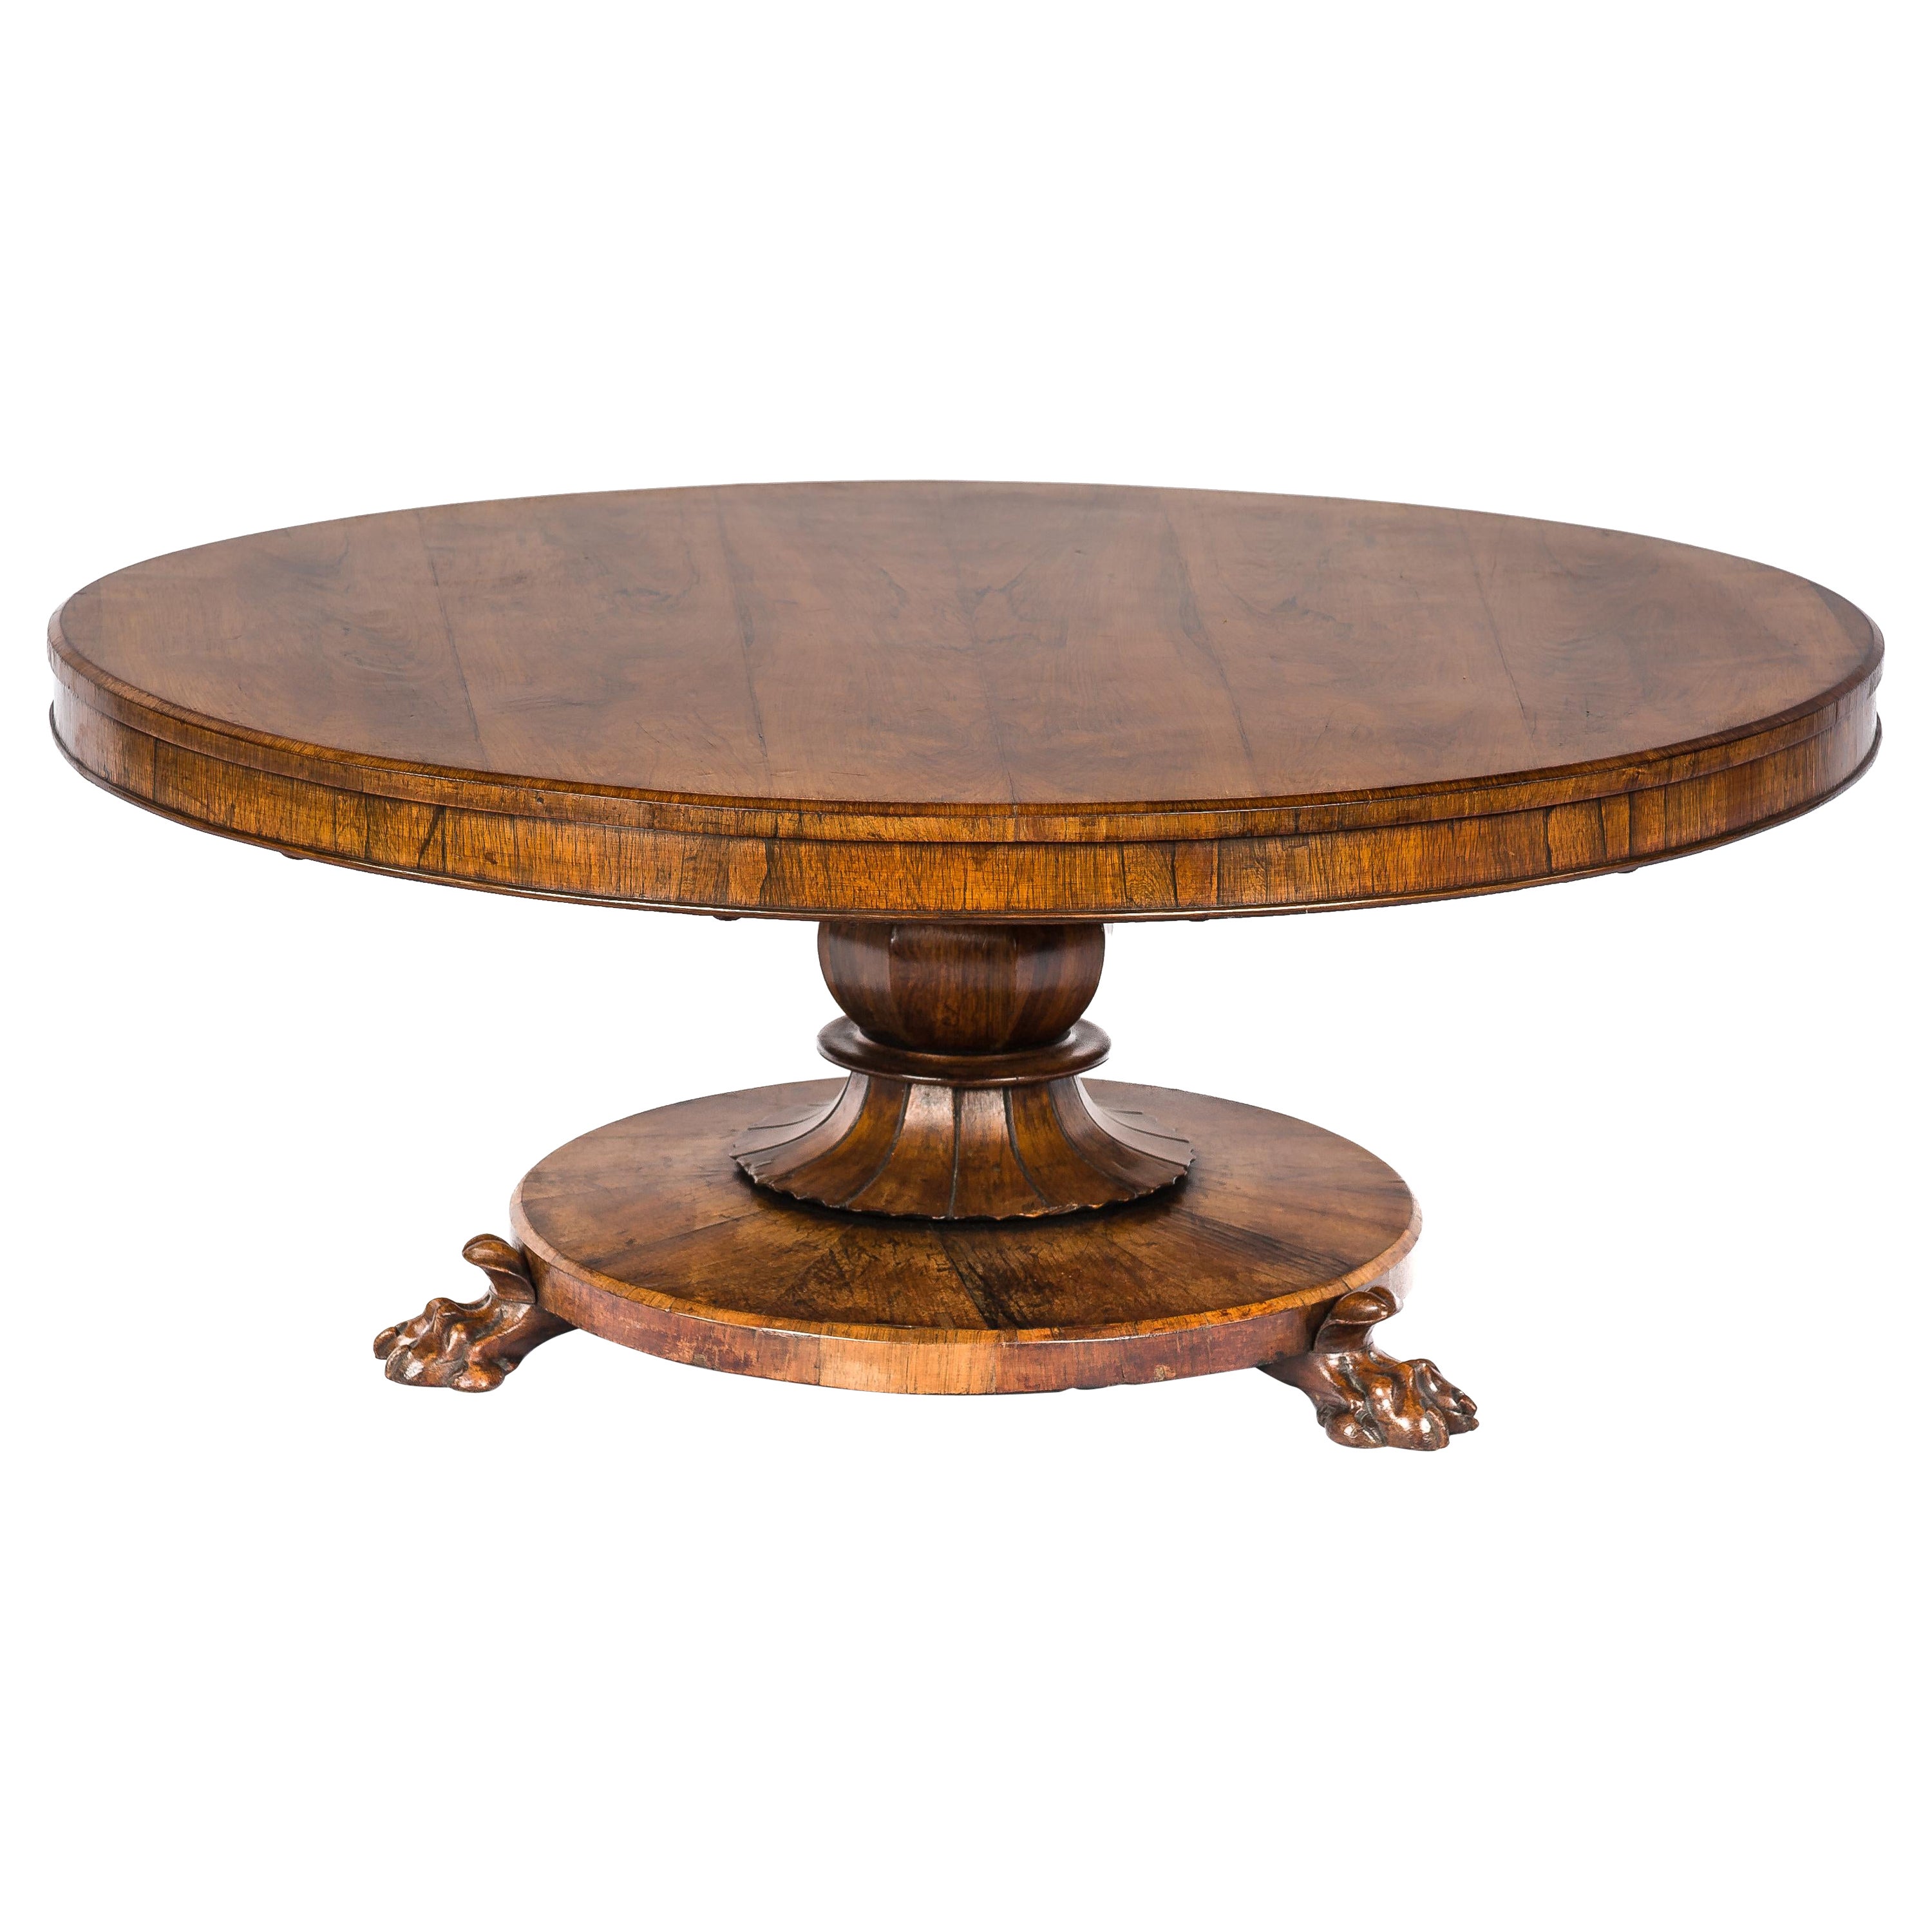 Antique 19th century French walnut warm honey color round coffee table 